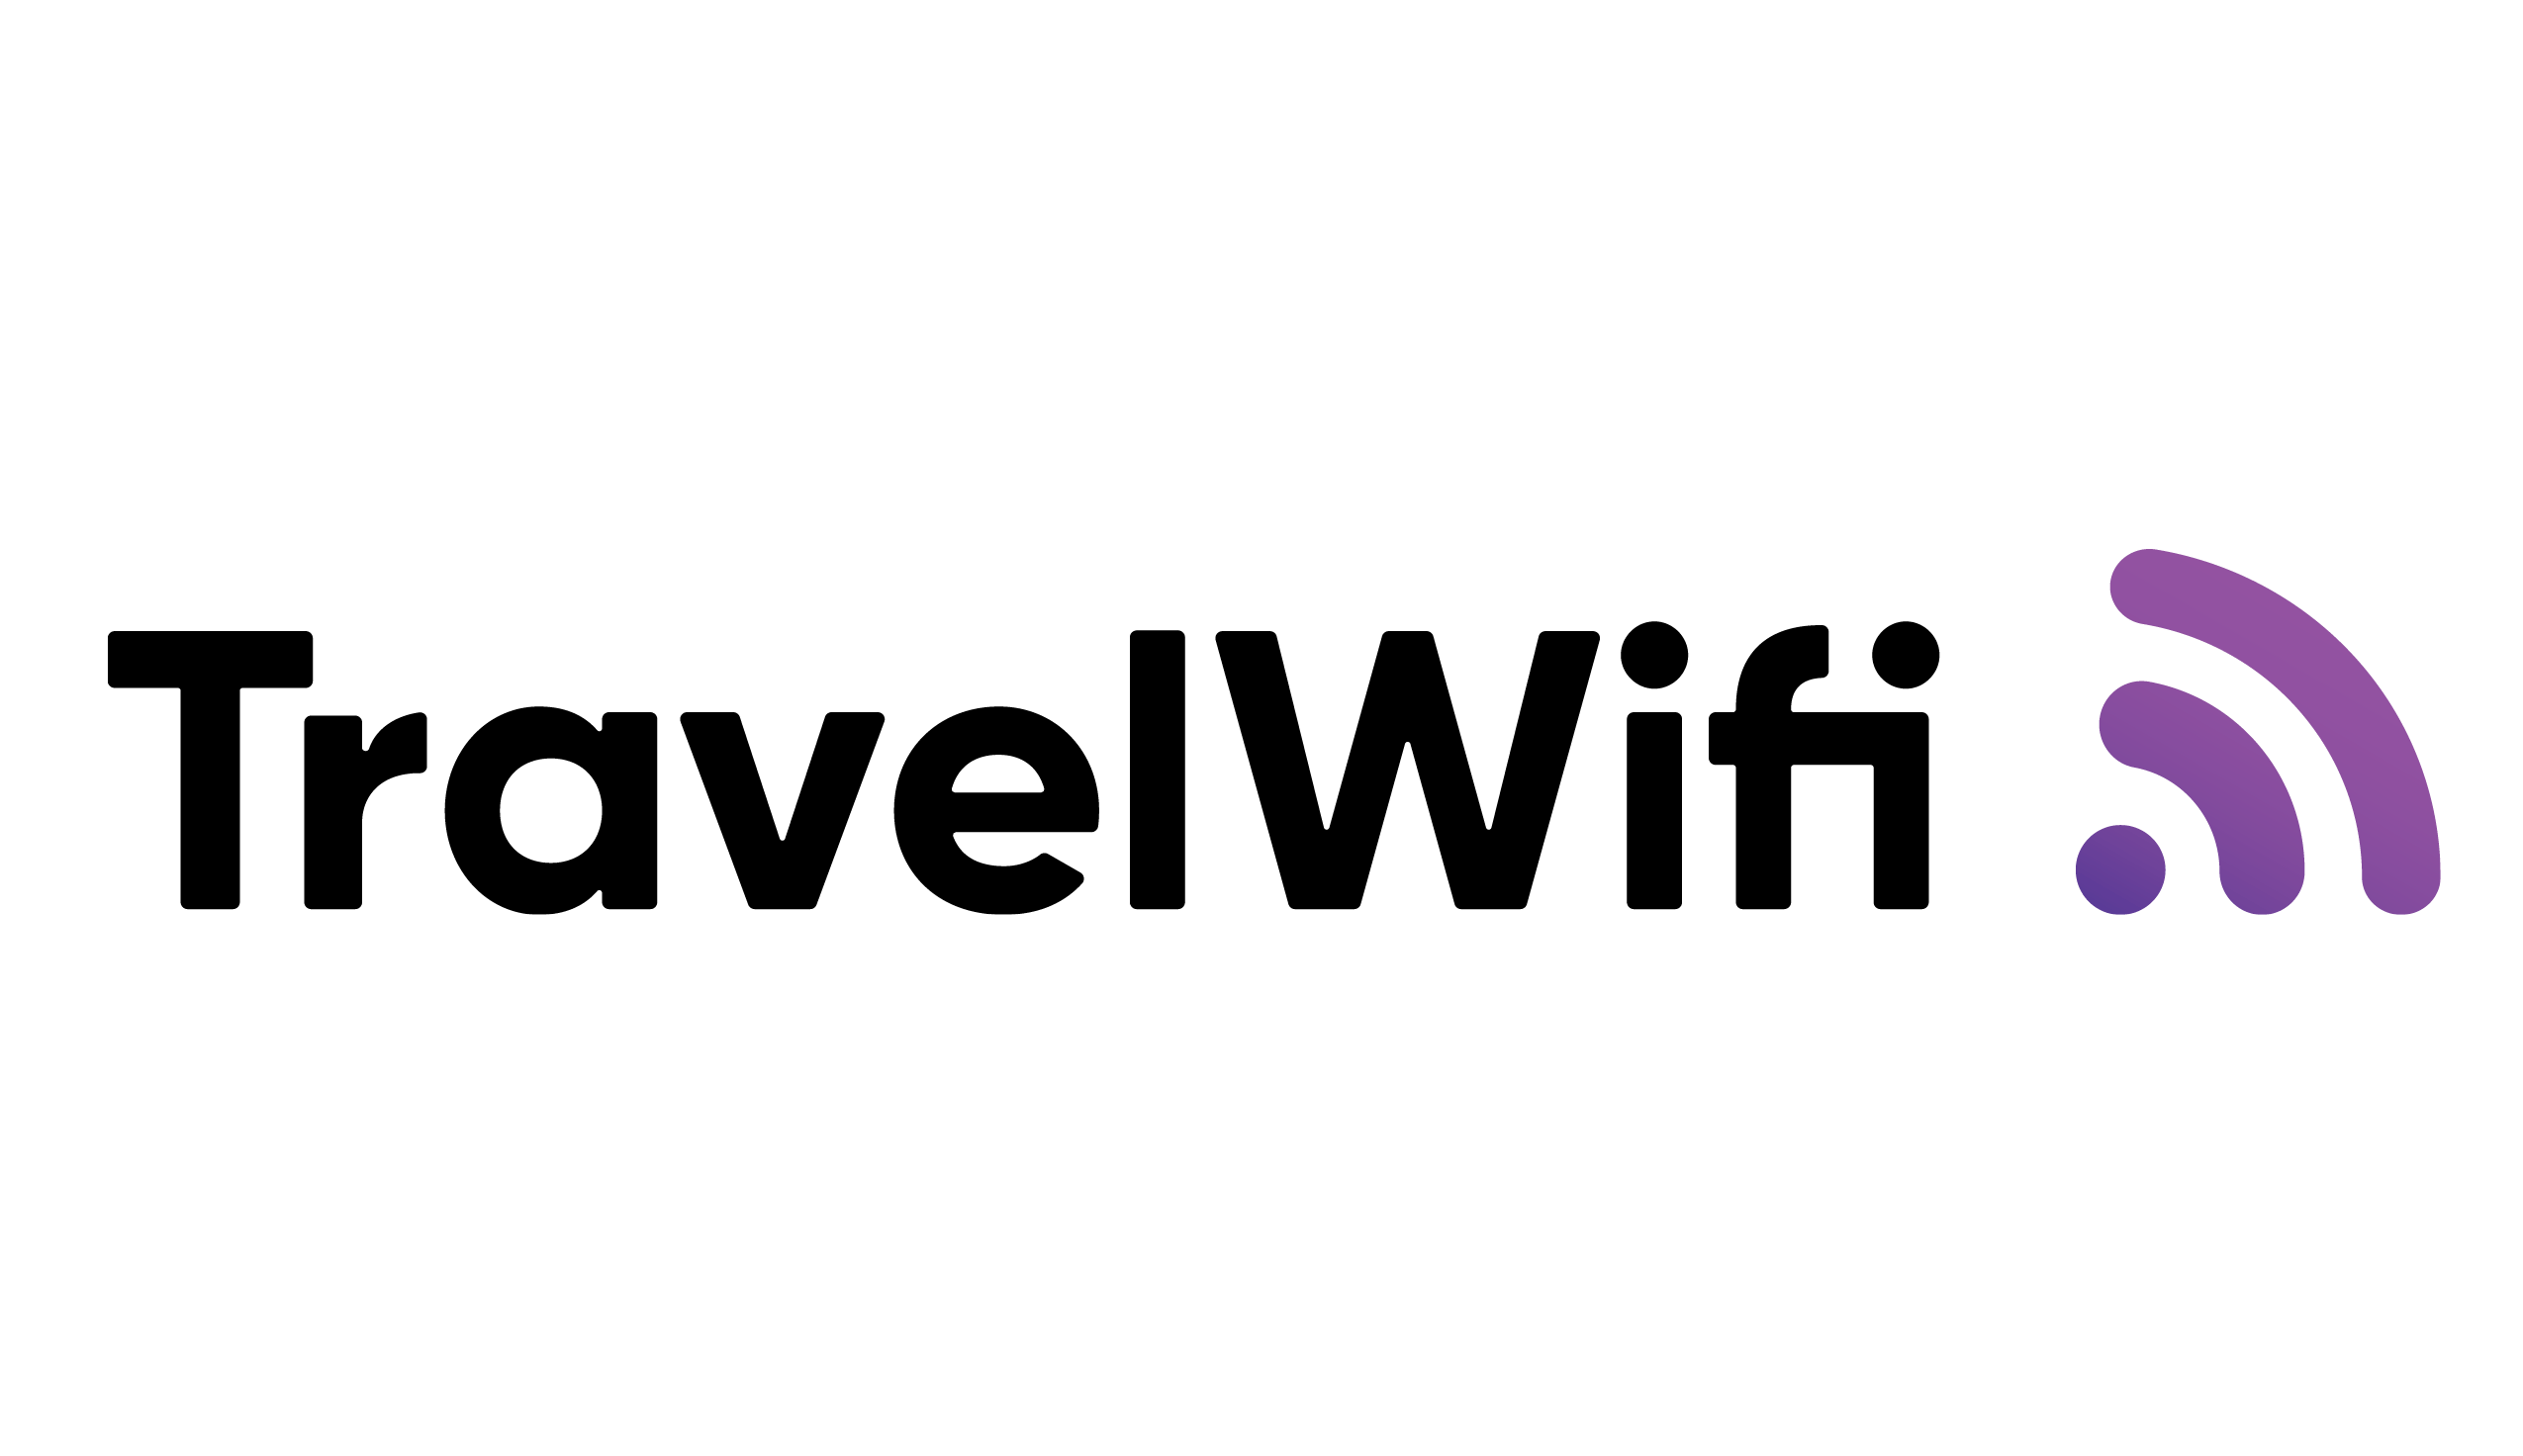 TravelWifi: Internet Access On the Go.